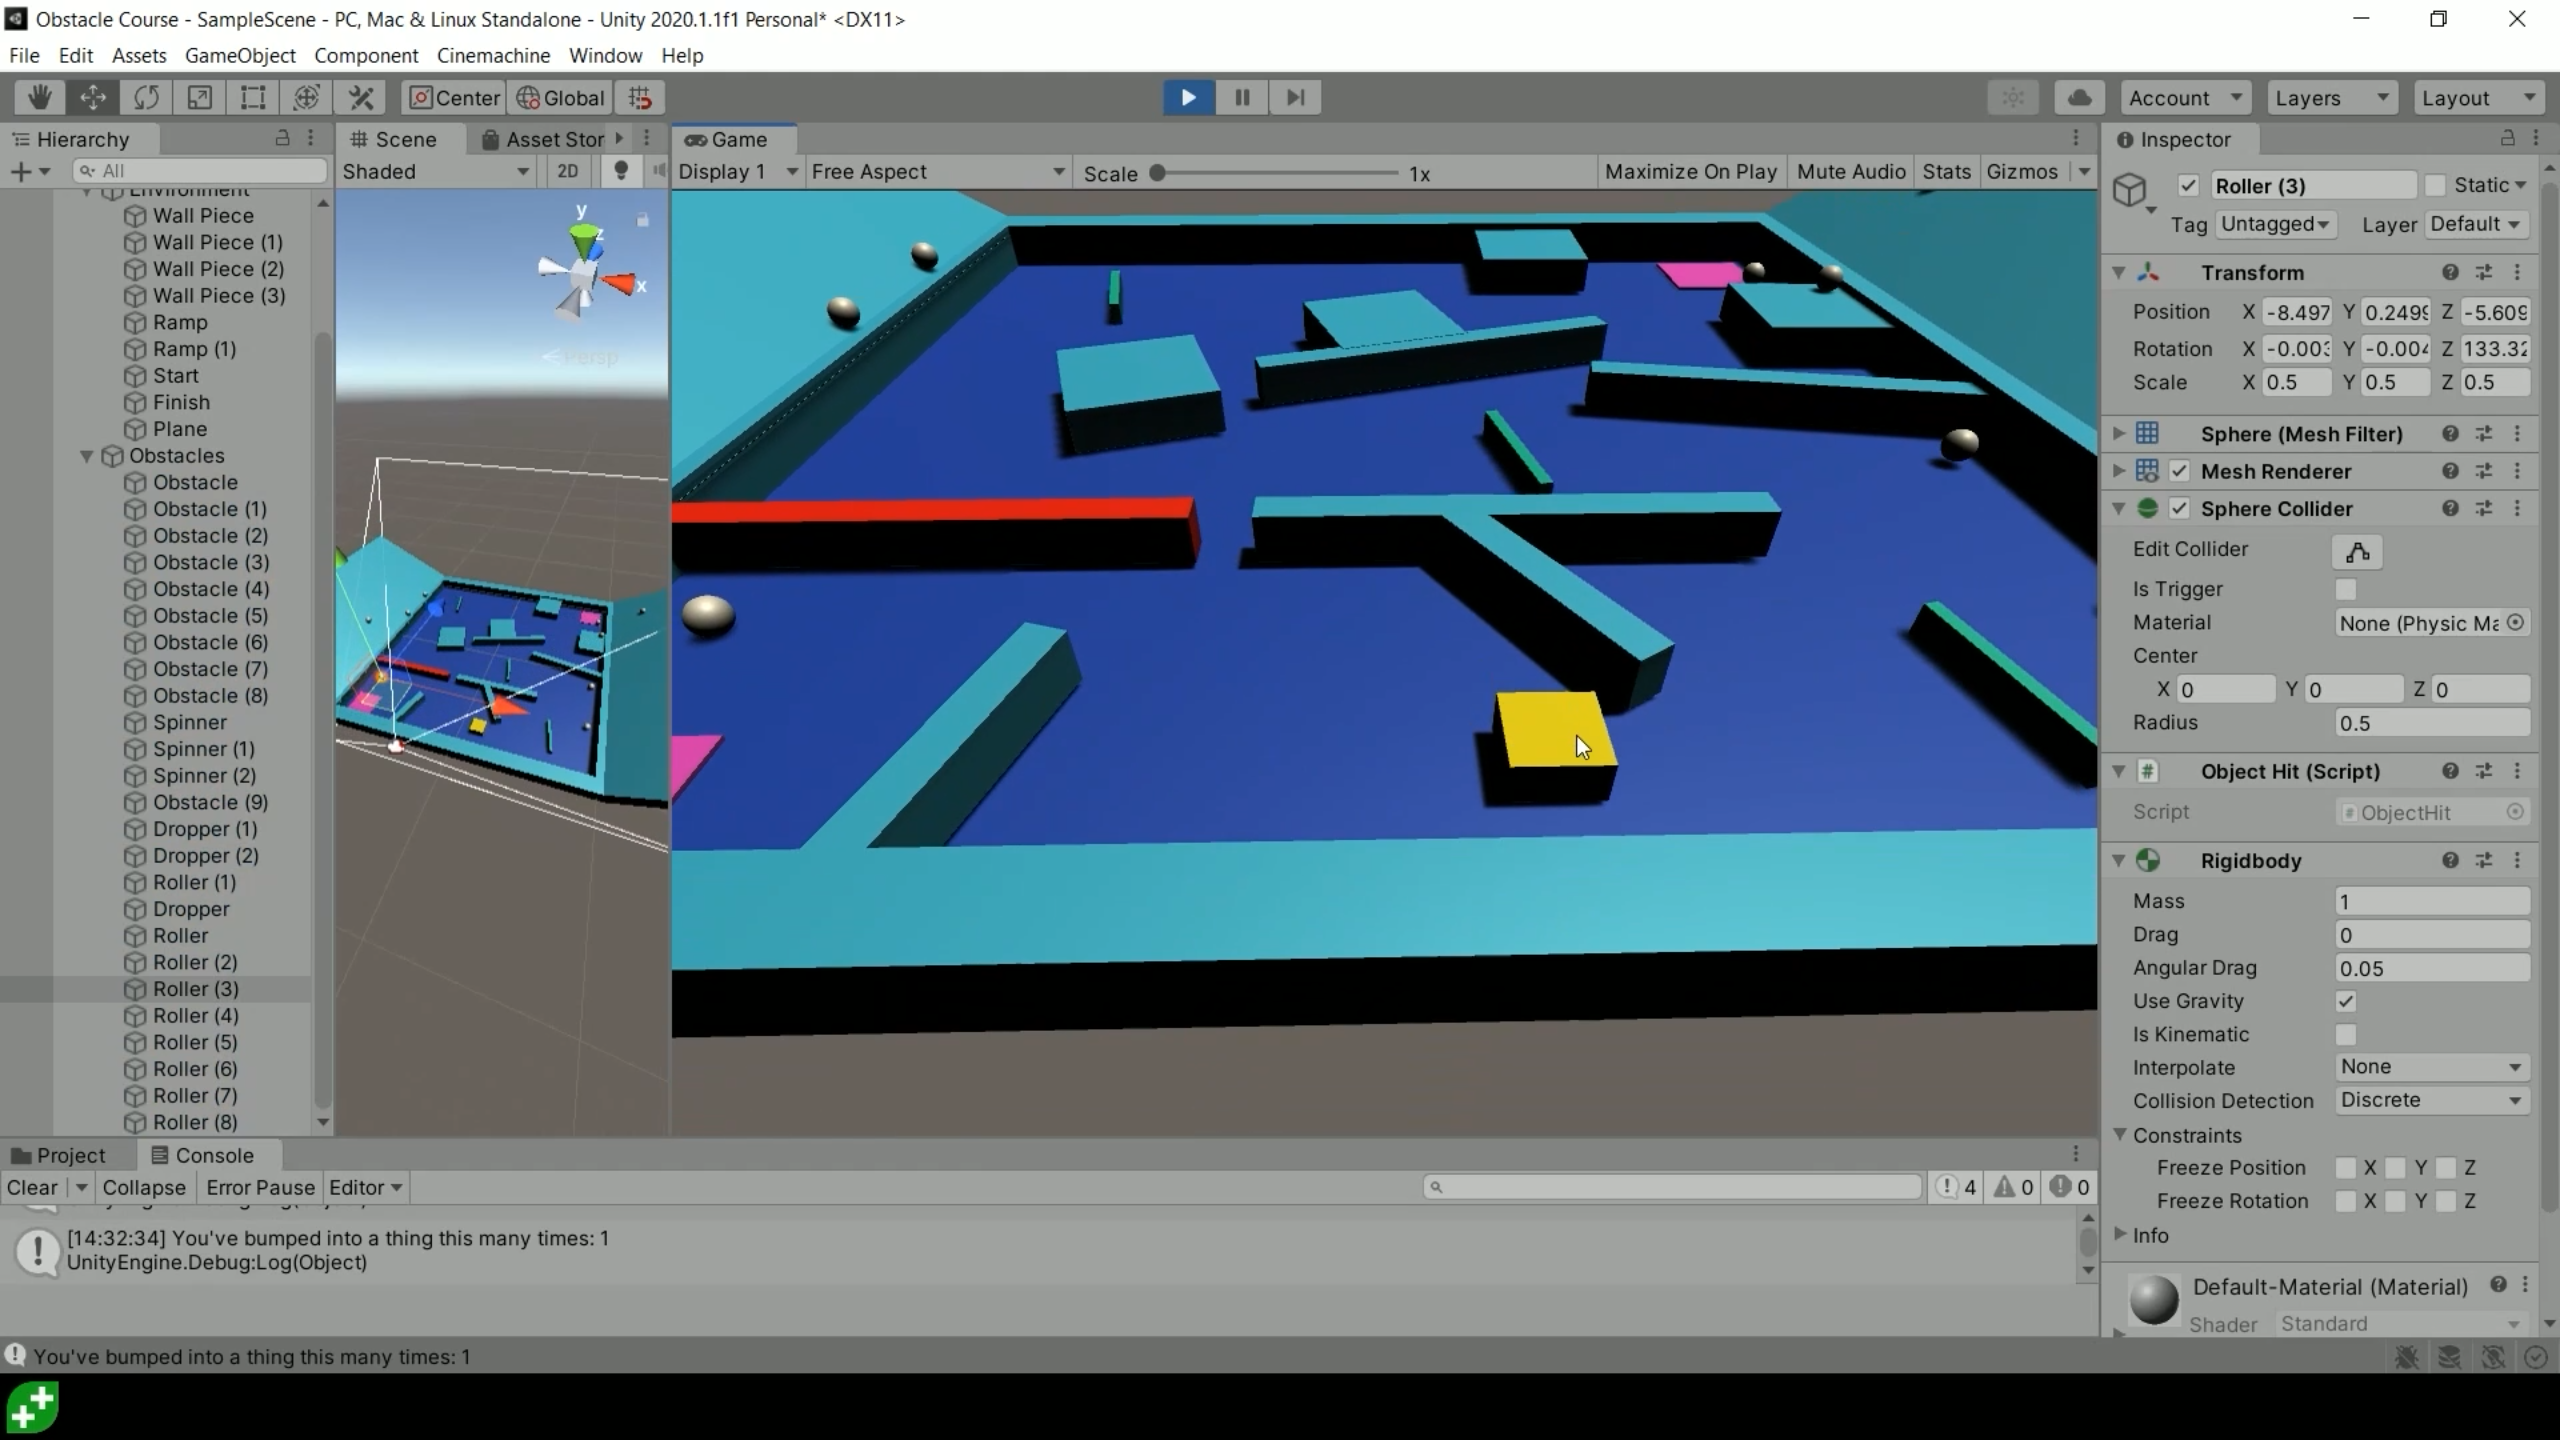 Video Game Development Using Unity: Code Games with C#